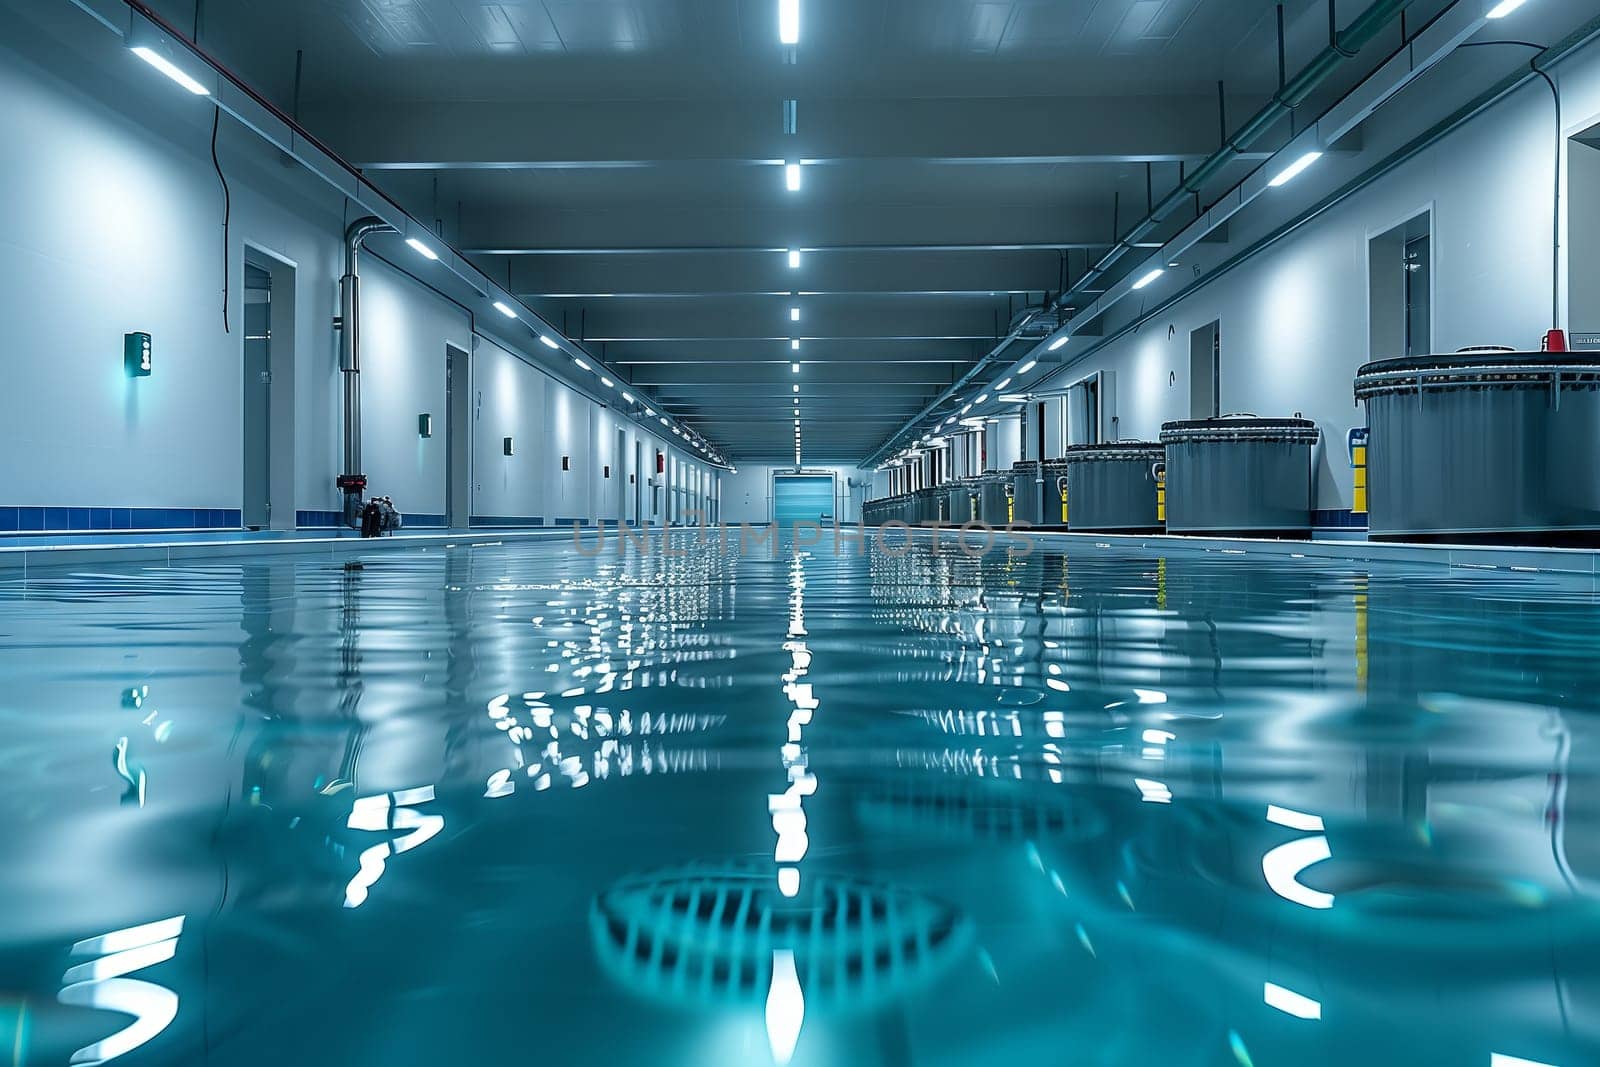 Aqua fixture surrounded by flooring inside the building is a large swimming pool by richwolf